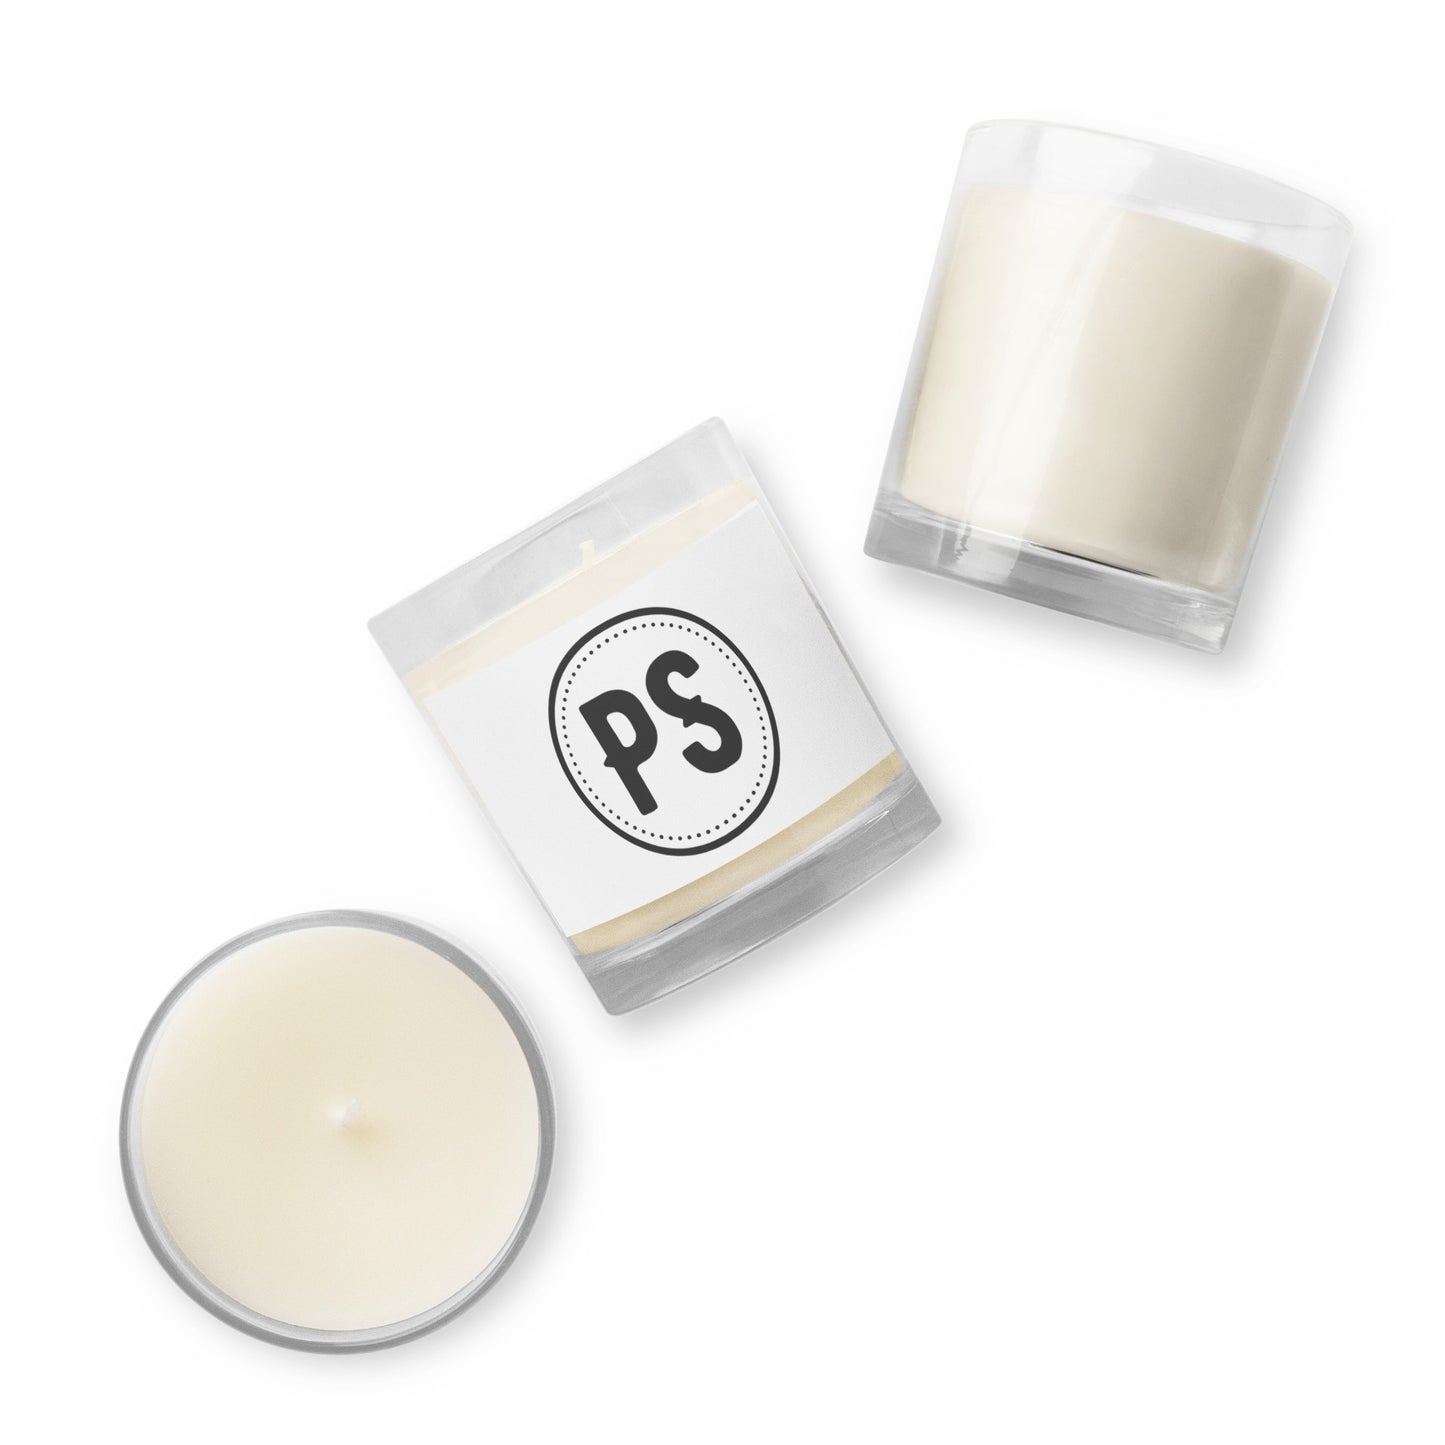 PS logo glass jar soy wax candle